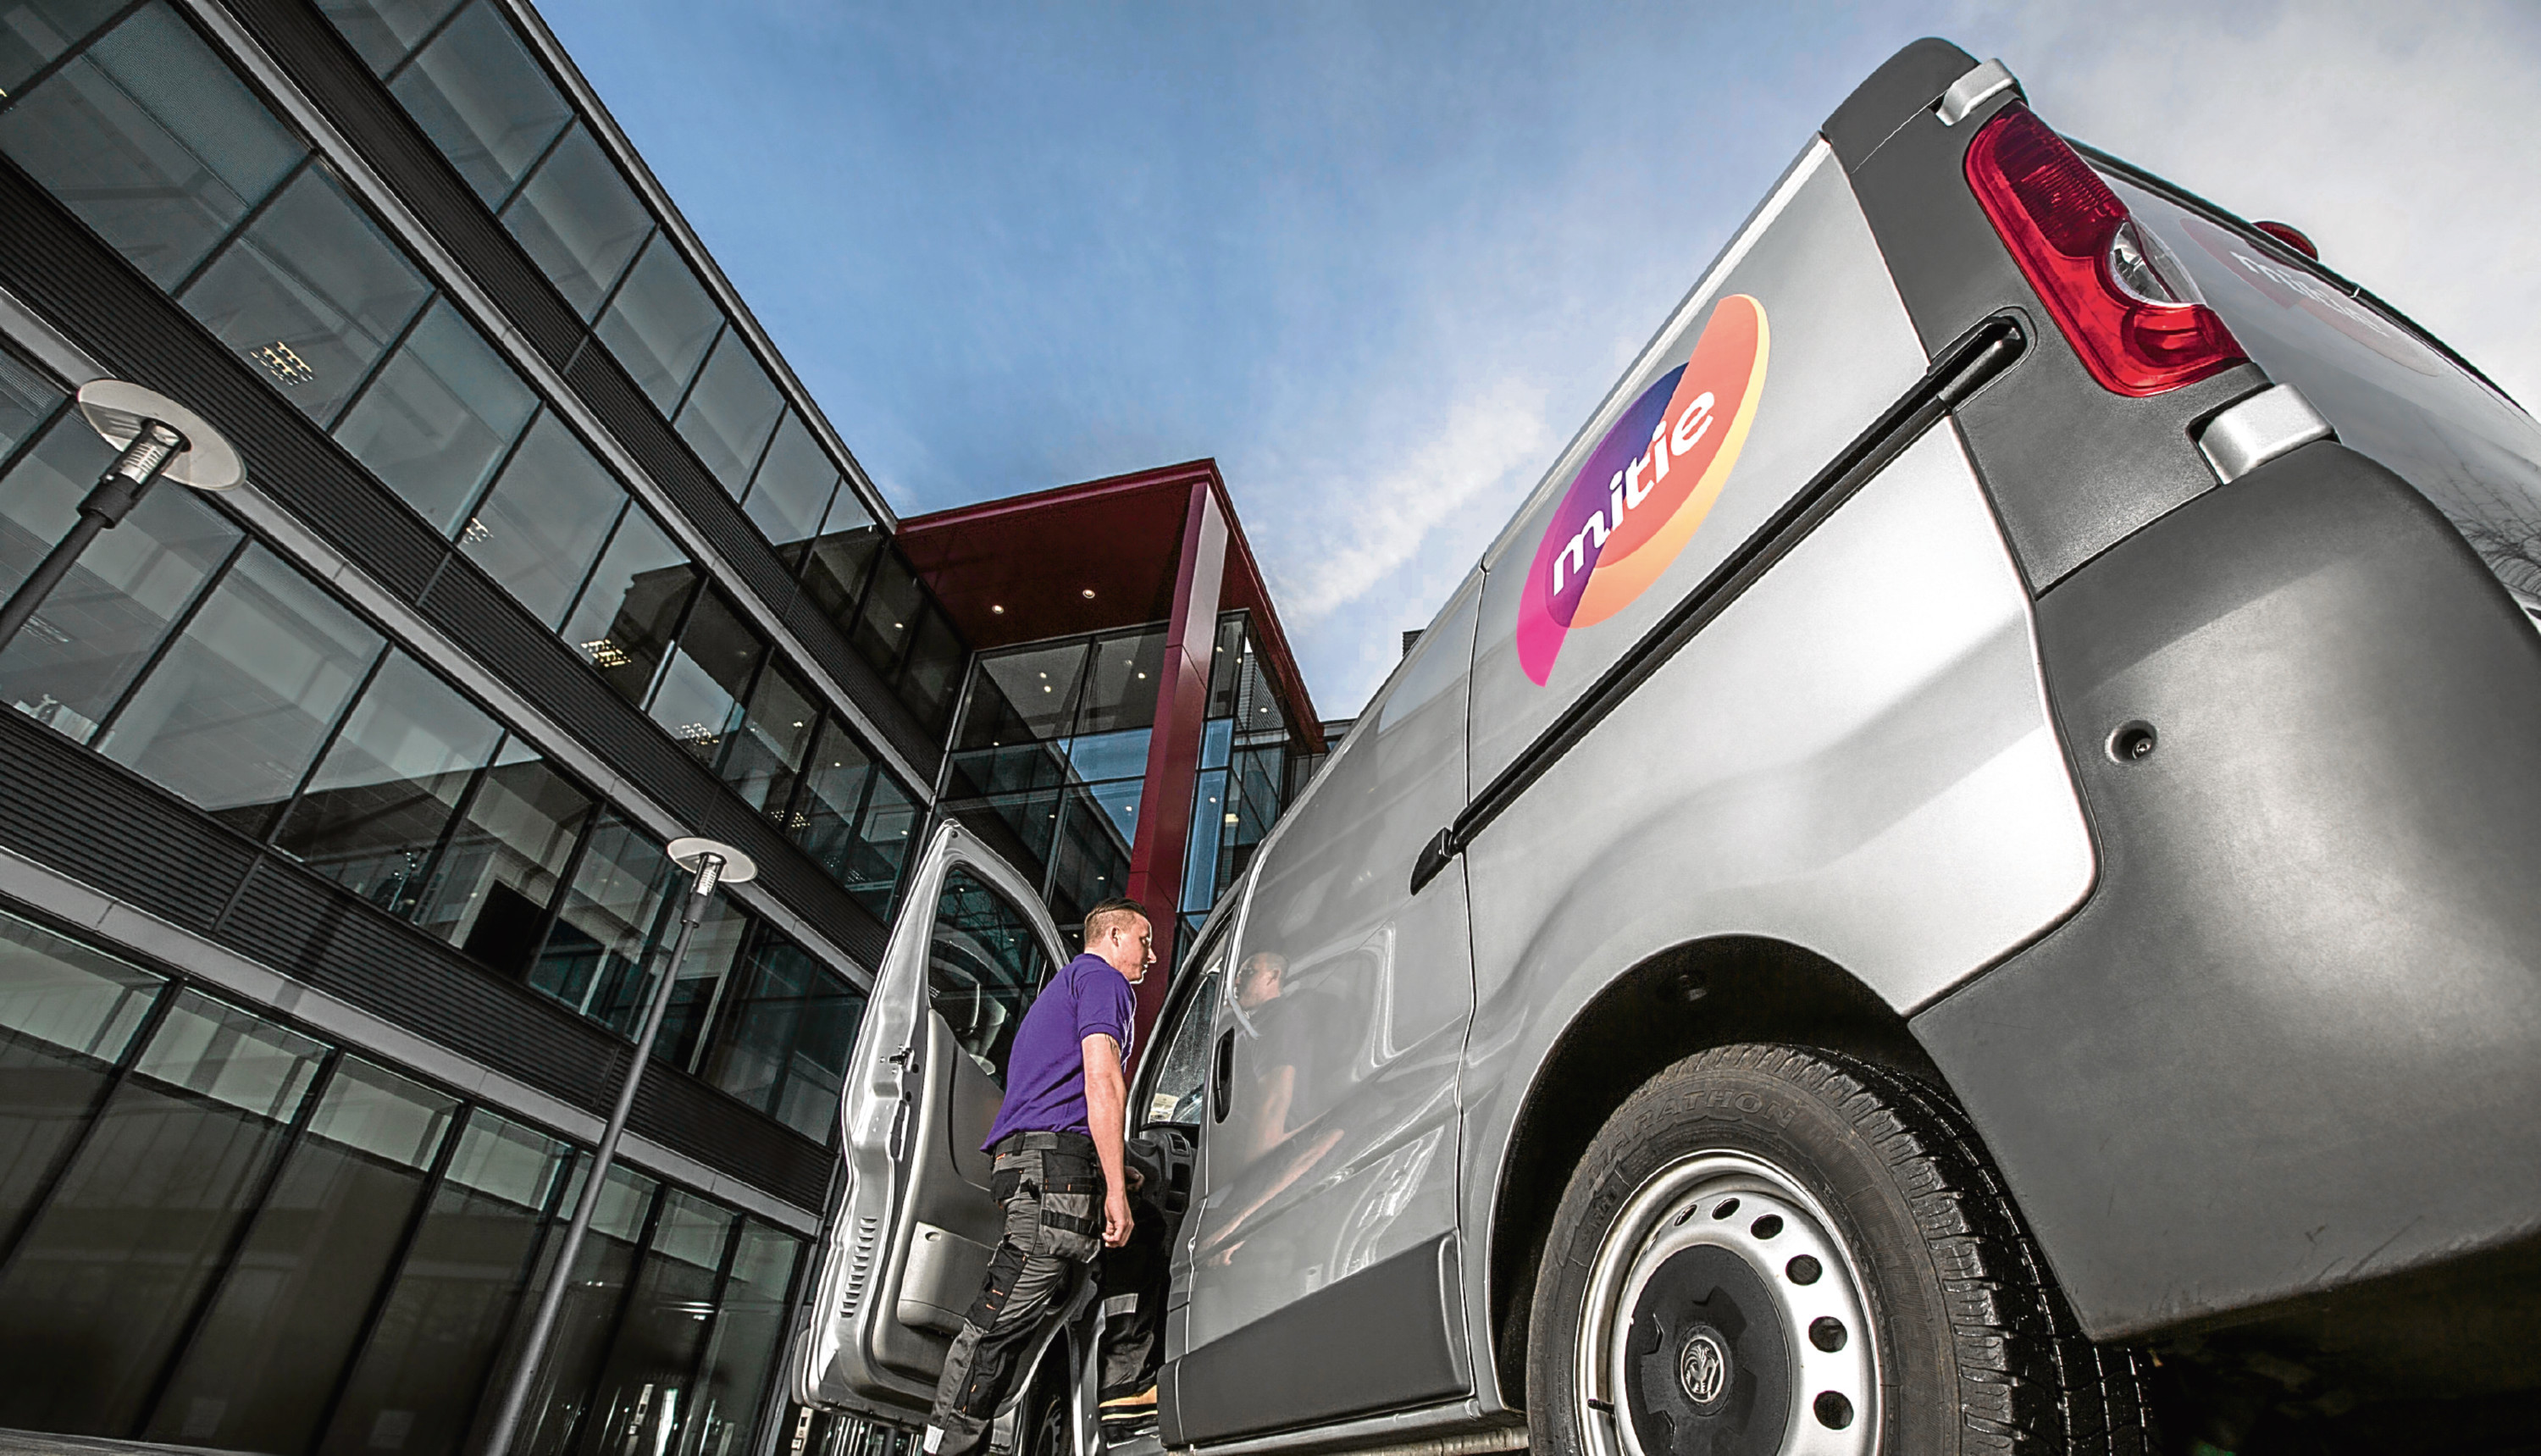 A vehicle used by outsourcing giant Mitie which has confirmed around 480 jobs are being axed as part of its turnaround plan and warned over higher-than-expected costs of its overhaul.